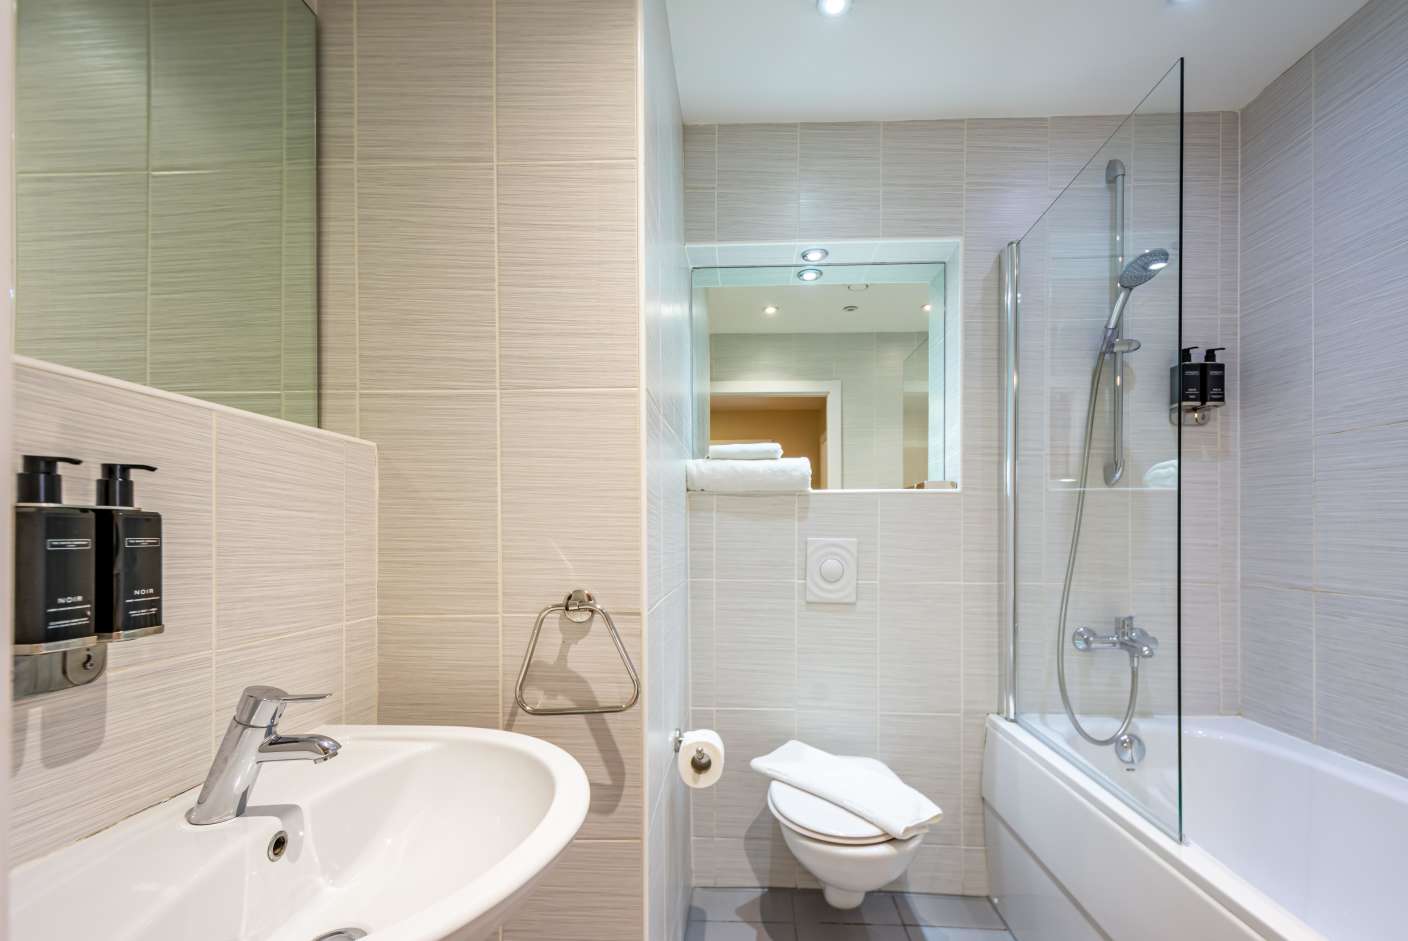 Apartment bathroom with bathtub, shower over bath, sink, toilet and The White Company toiletries.